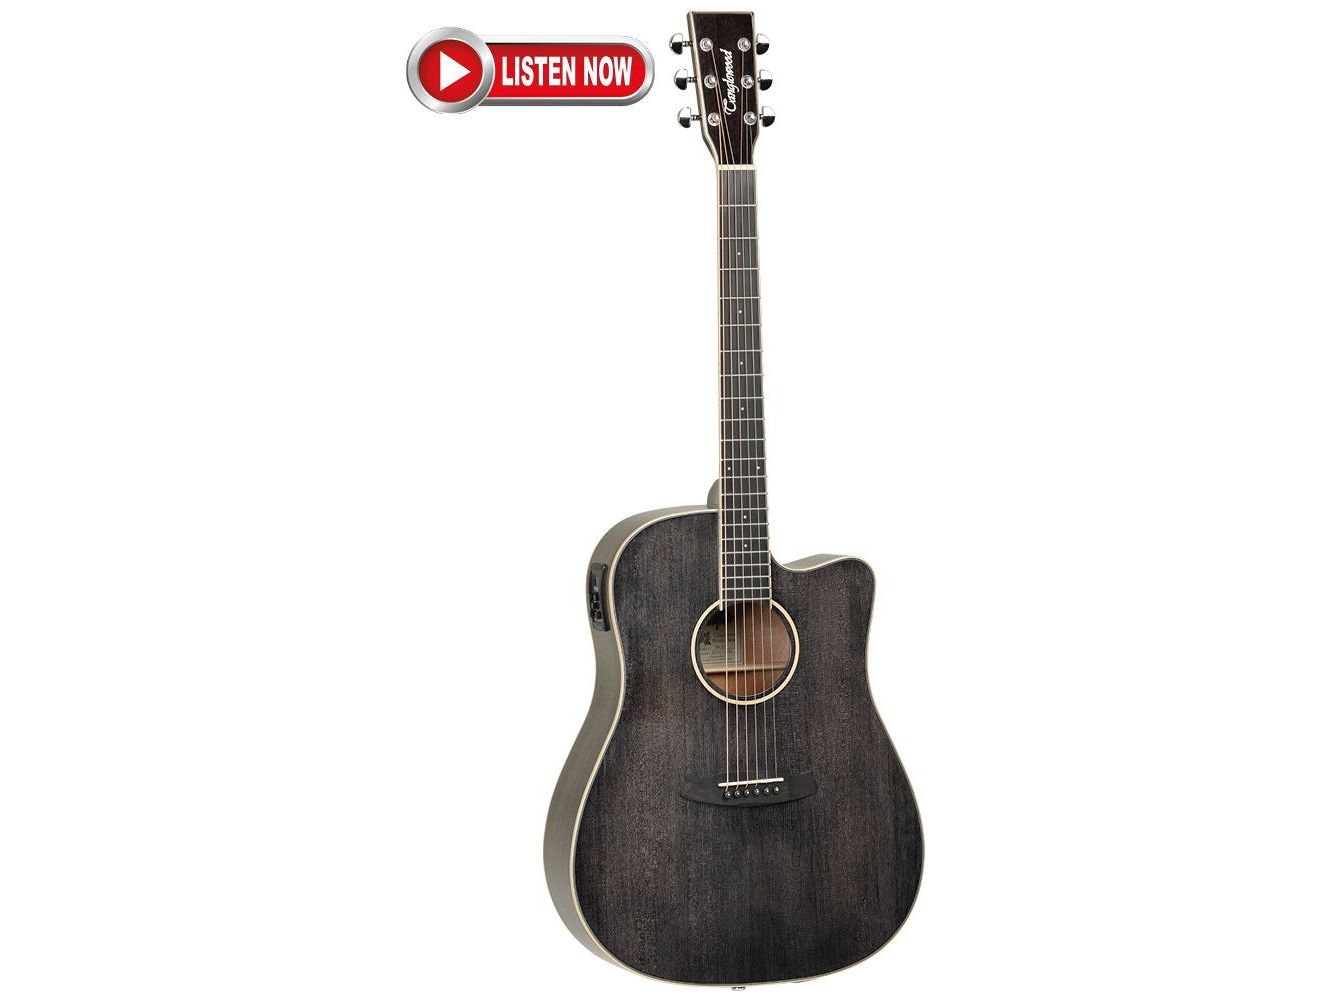 Tanglewood Winterleaf TW5 E BS Dreadnought Electric Acoustic Guitar Black Shadow